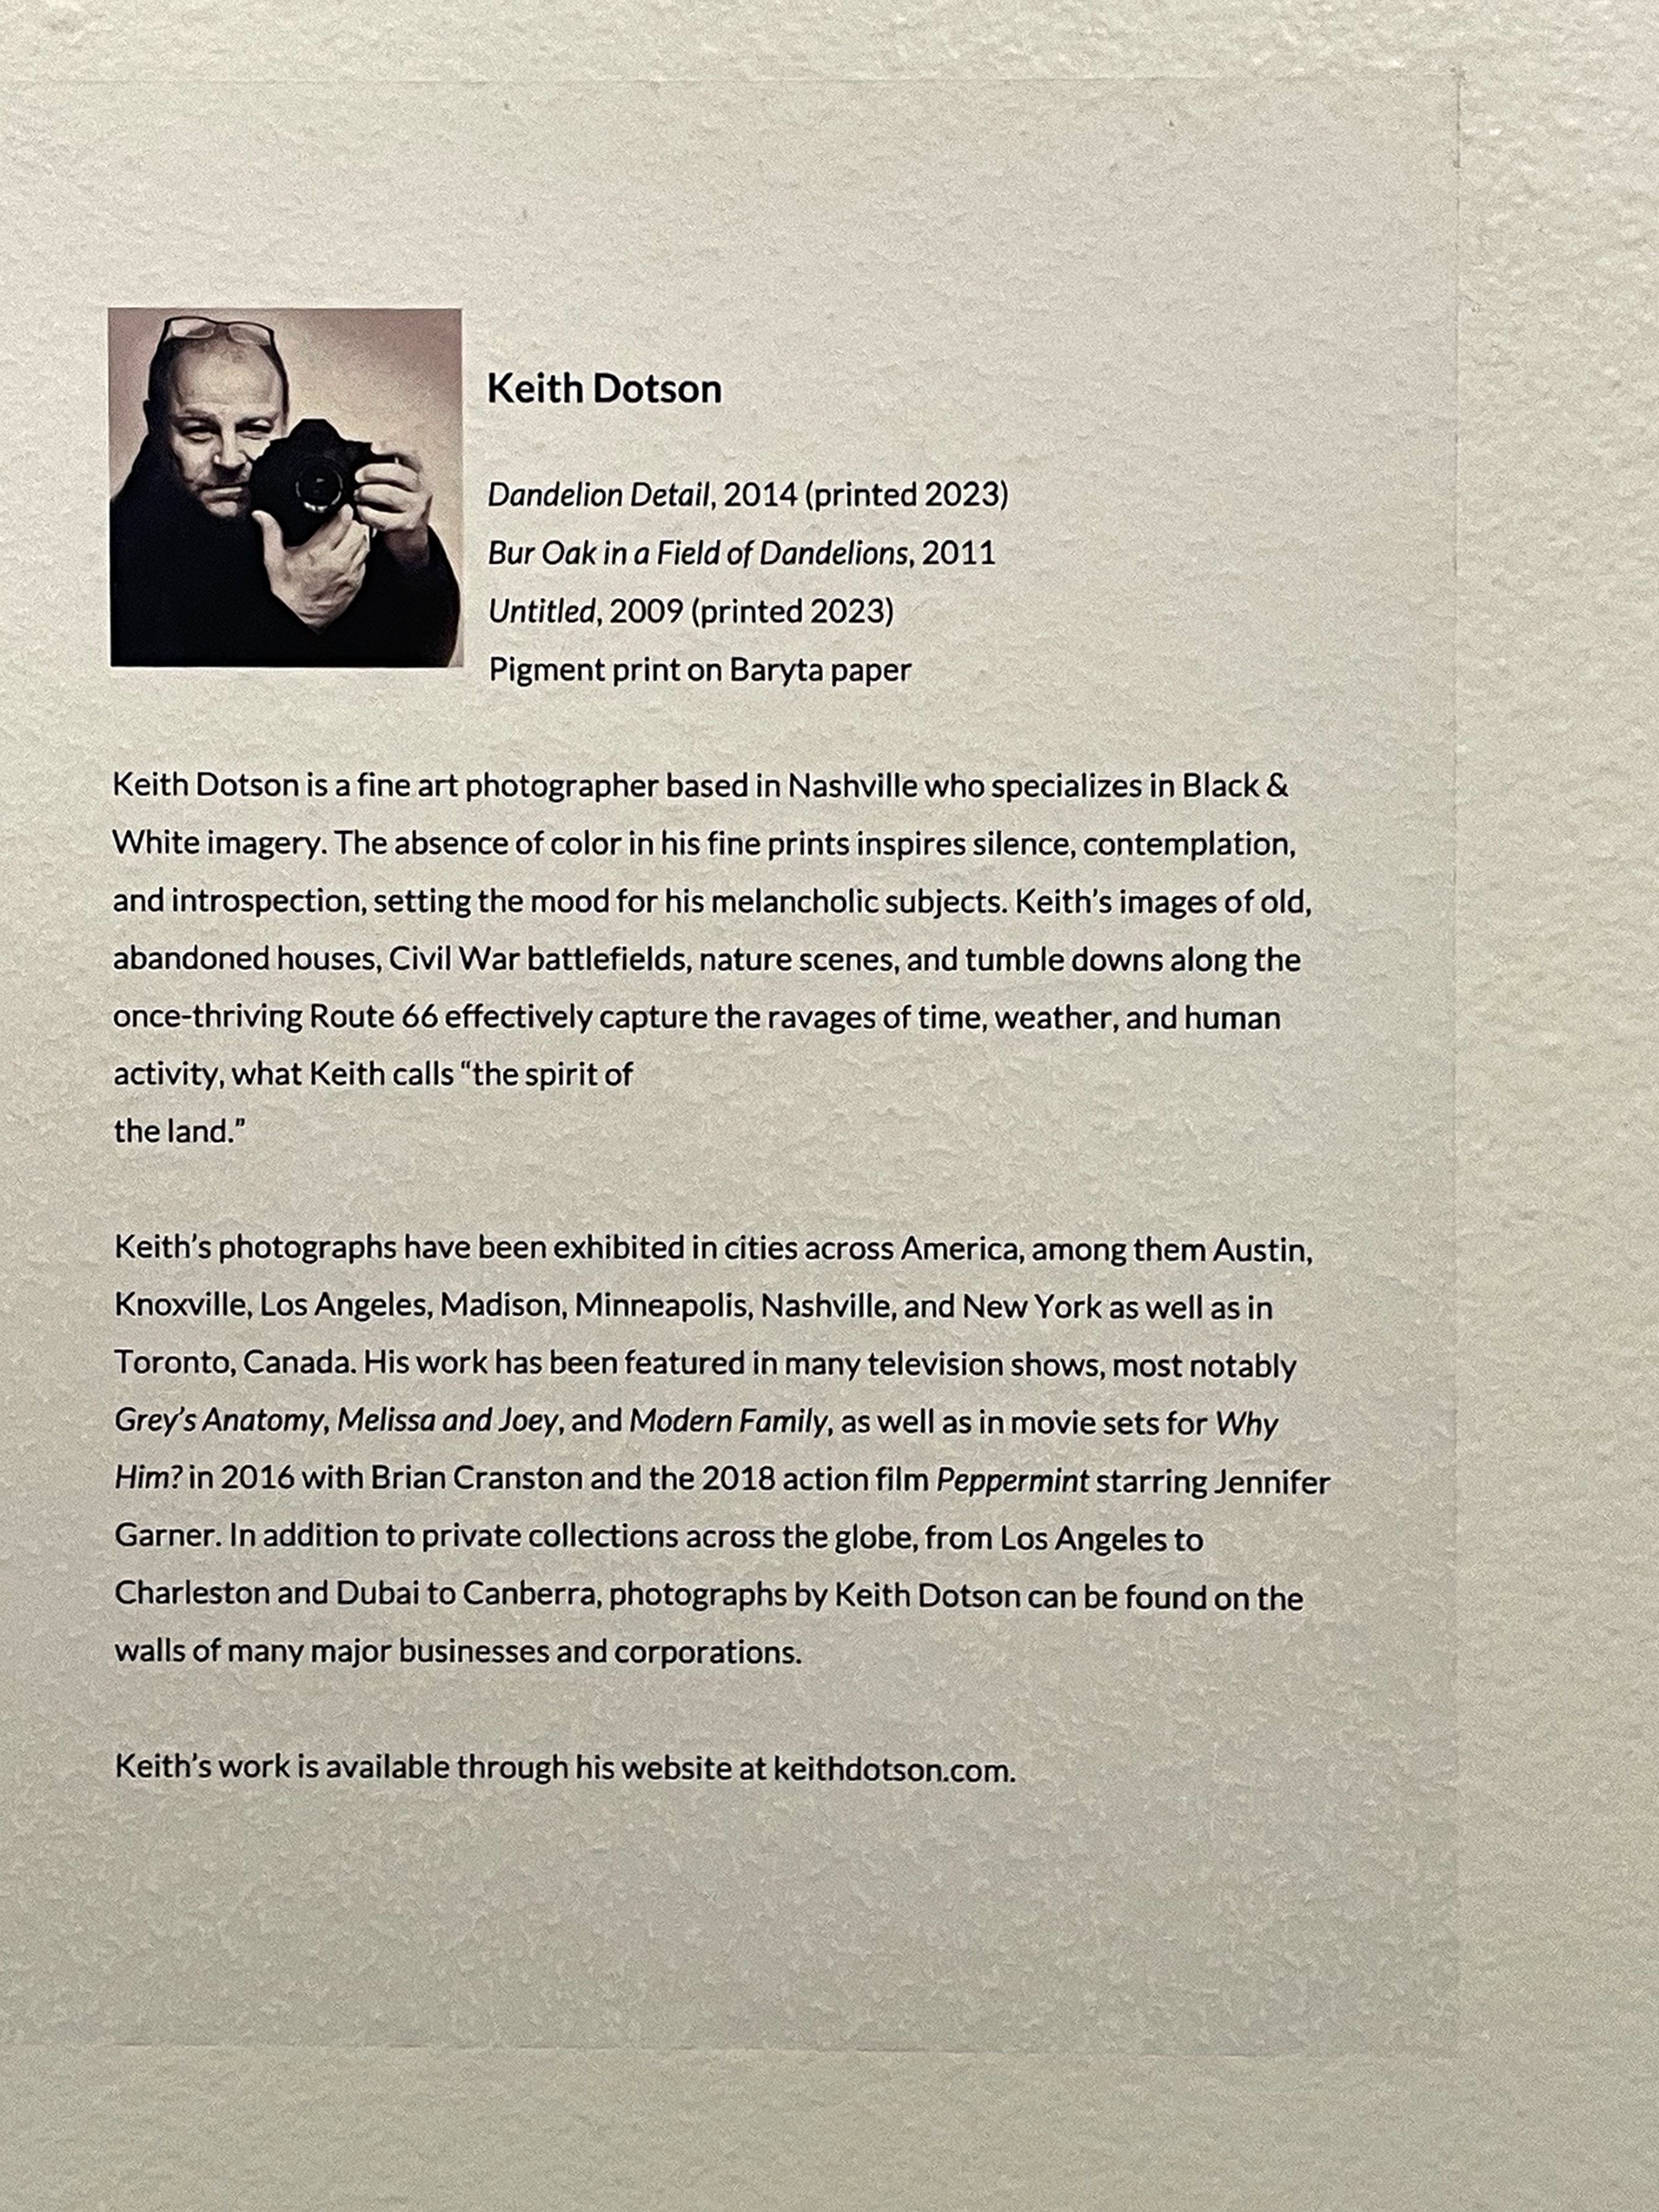 Bio for Keith Dotson's exhibition at Longue Vue House and Gardens